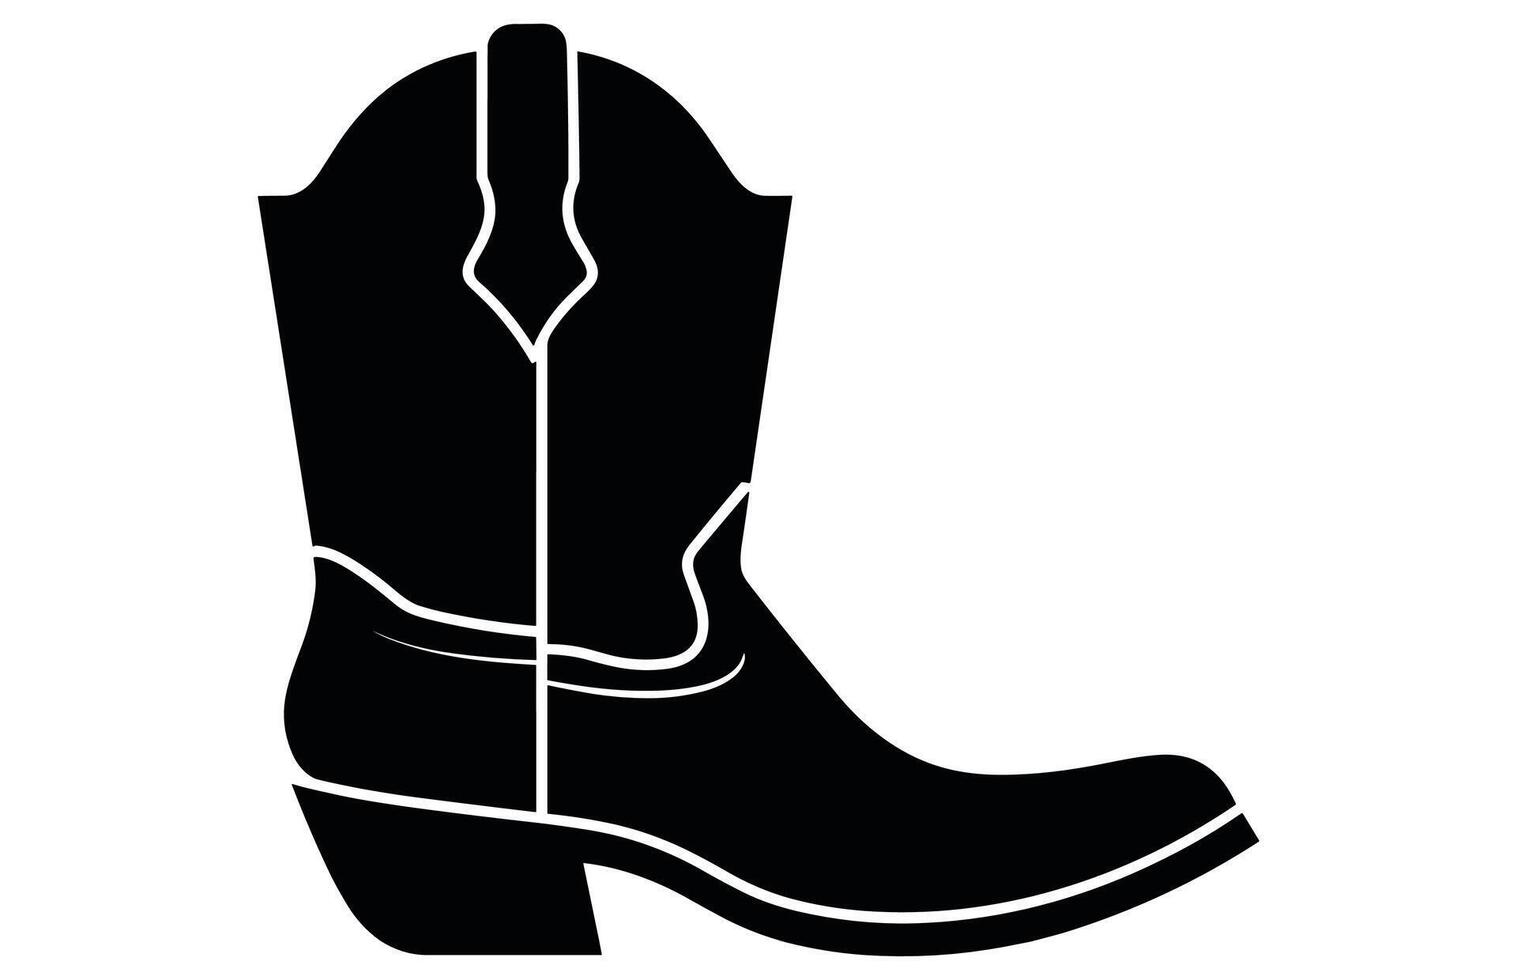 Cowboy boots with ornament. Cowboy western and wild west theme.Cowboy boot Illustration. Cowboy boot heels vector silhouette illustration set.